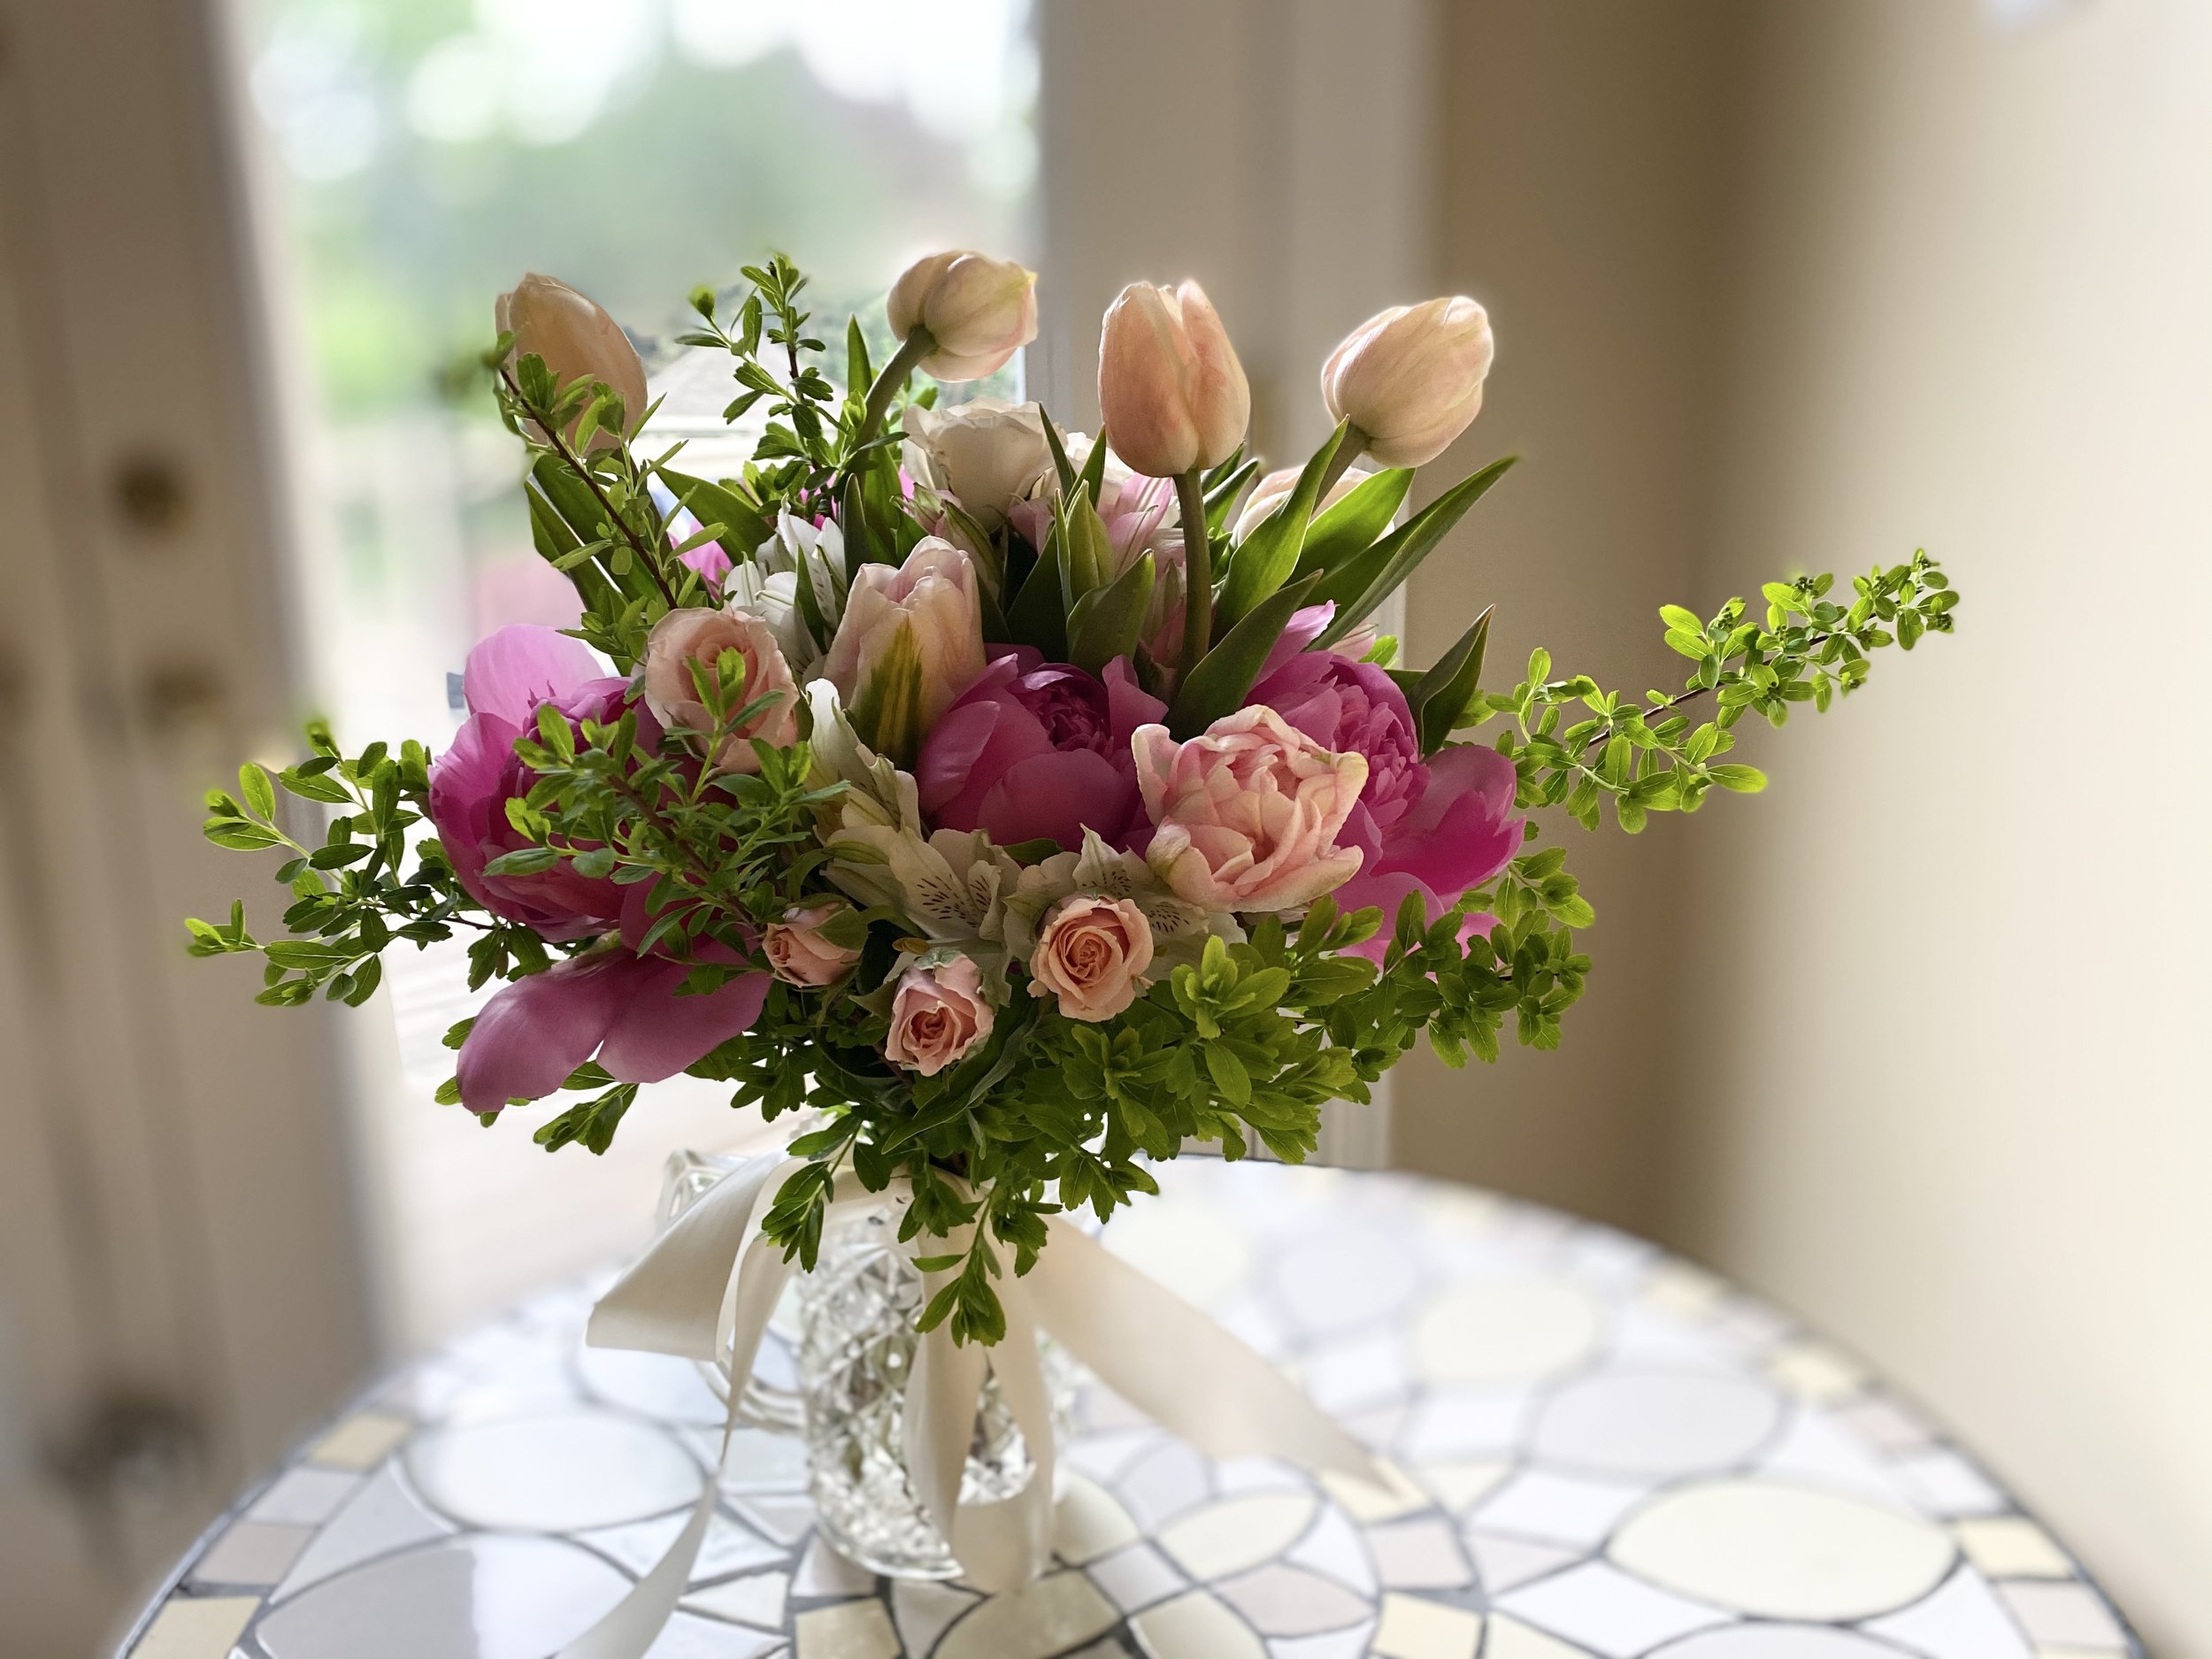 FREE Markham Flower Delivery, Online Flowers